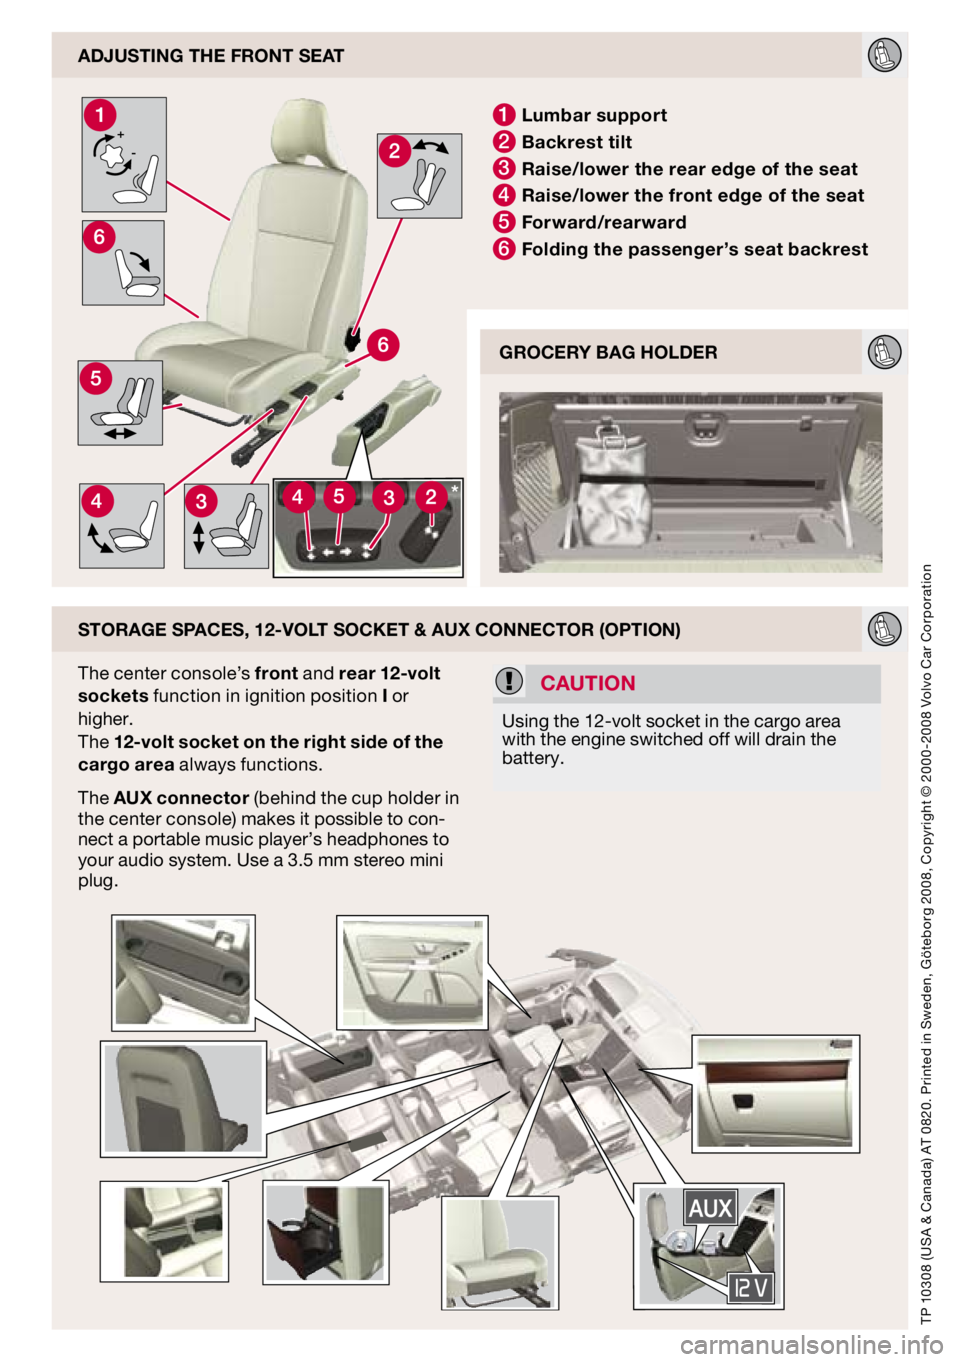 VOLVO XC90 2009  Quick Guide 
o
+-
AdjUSTIng THe FROnT SeAT
STORAge SPAceS, 12-vOlT SOckeT & AUX cOnnecTOR (OPTIOn)
1 l umbar support
2 b ackrest tilt
3 Raise/lower the rear edge of the seat
4 Raise/lower the front edge of the se